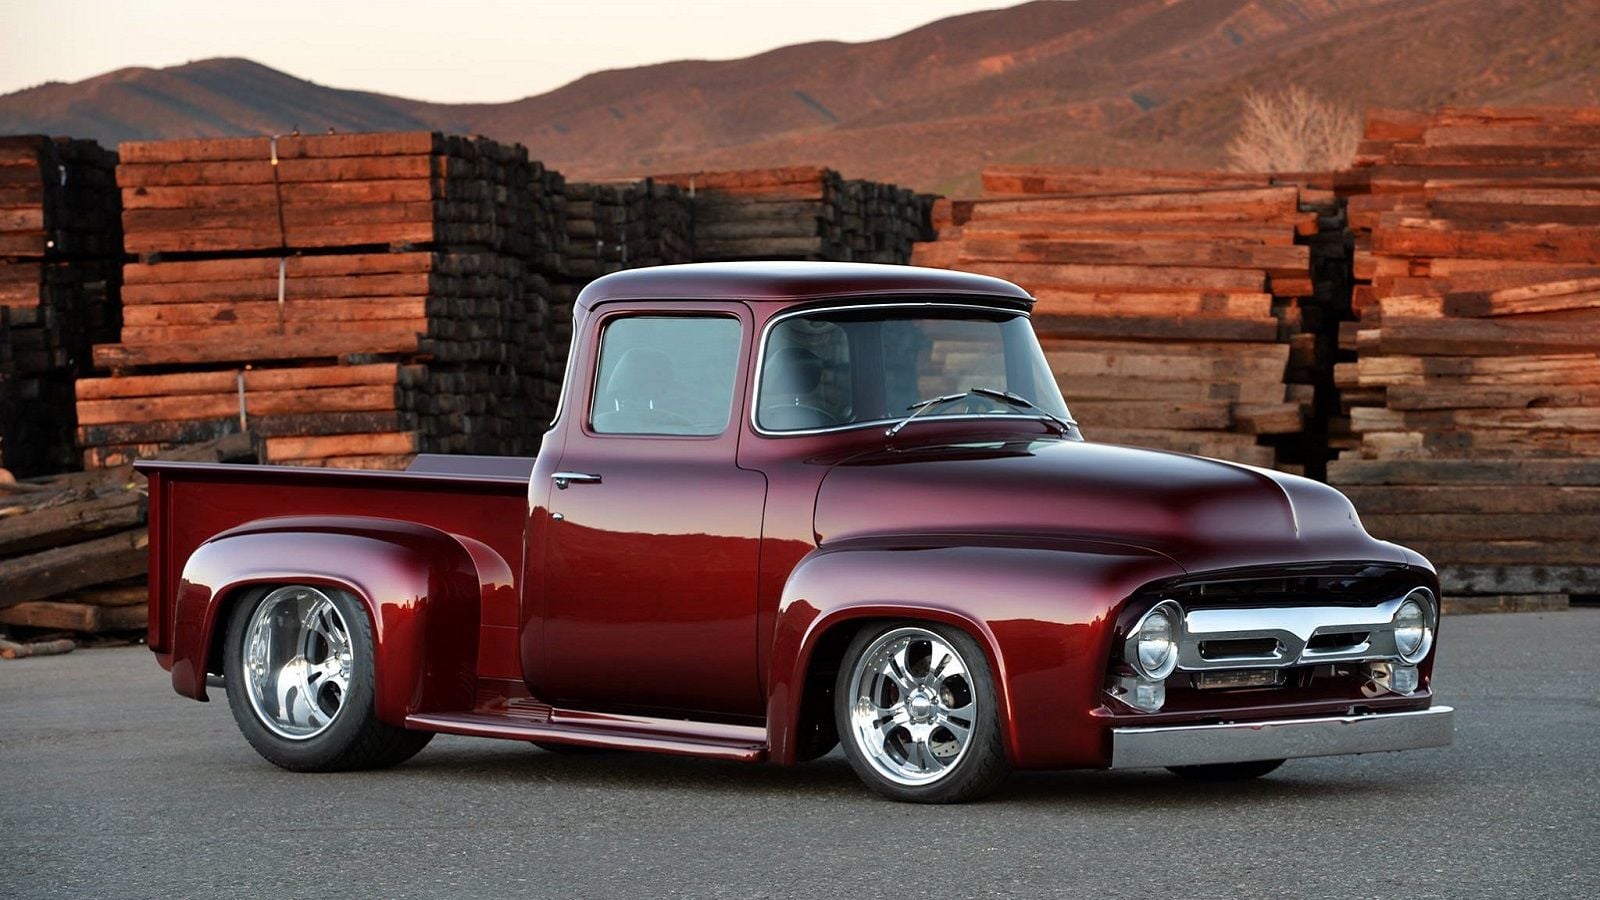 Ford Cars And Trucks [35+] Classic Ford Truck Wallpaper